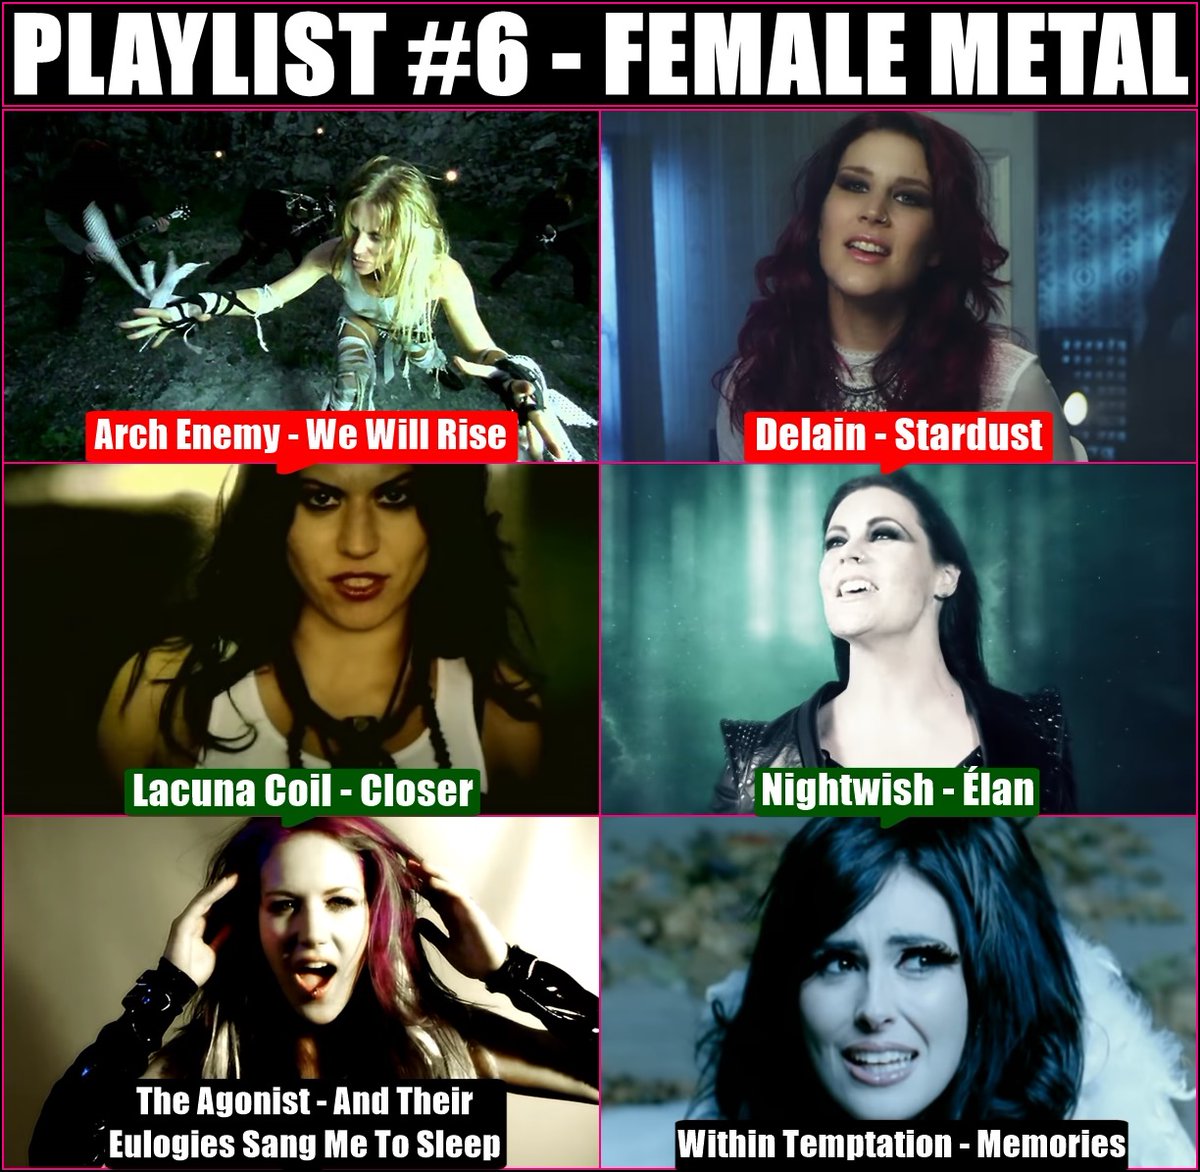 Playlist #6 - Female Metal

Arch Enemy - 'We Will Rise'
Delain - 'Stardust'
Lacuna Coil - 'Closer'
Nightwish - 'Élan'
The Agonist - 'and Their Eulogies Sang Me to Sleep'
Within Temptation - 'Memories'

#archenemy #delain #lacunacoil #nightwish #theagonist #withintemptation